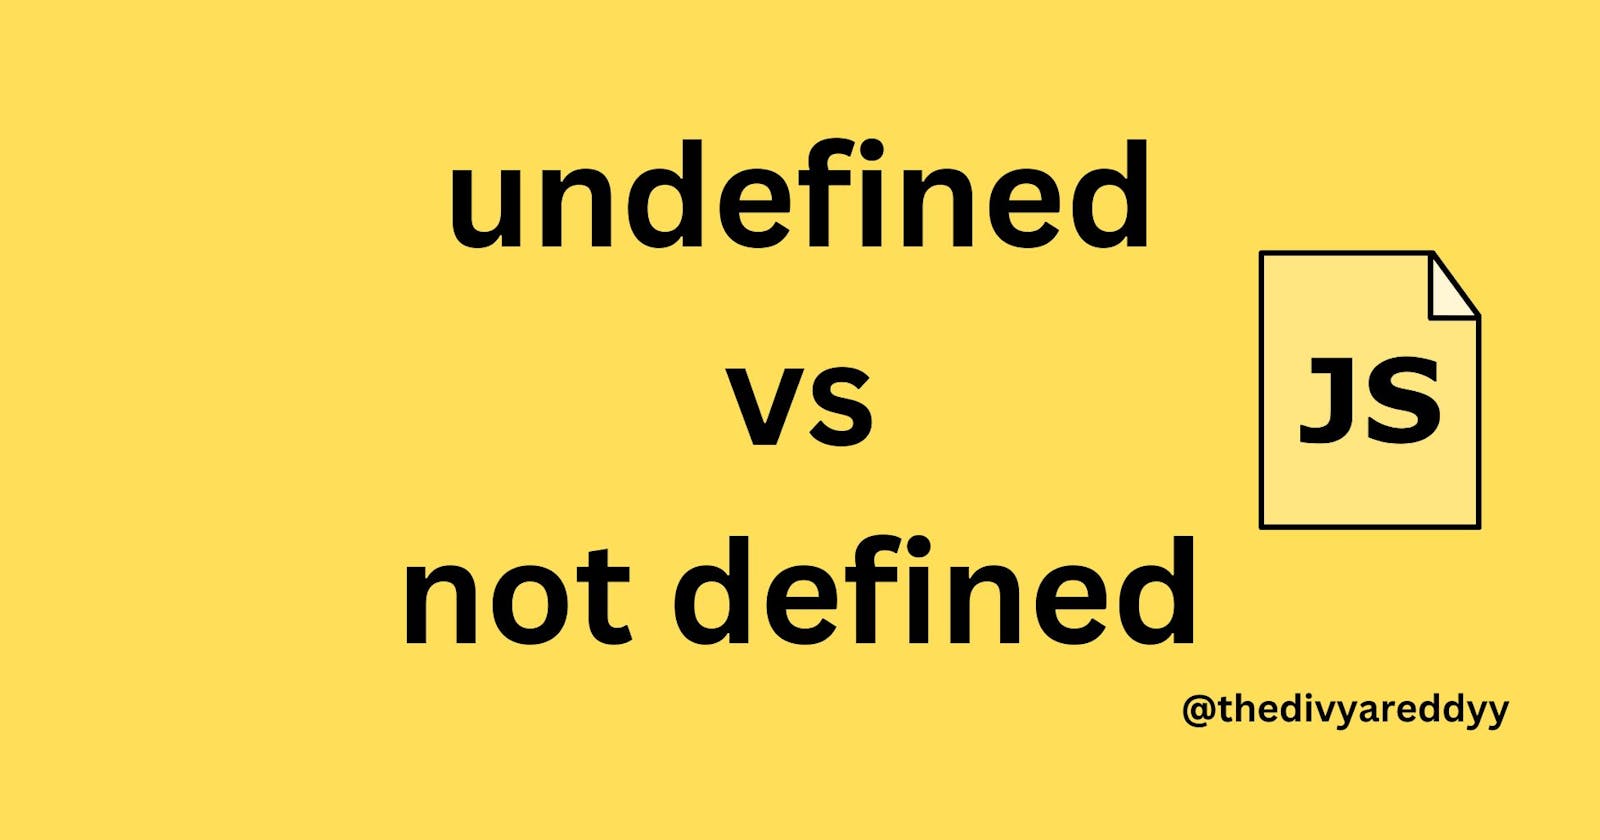 Undefined vs Not defined in JavaScript